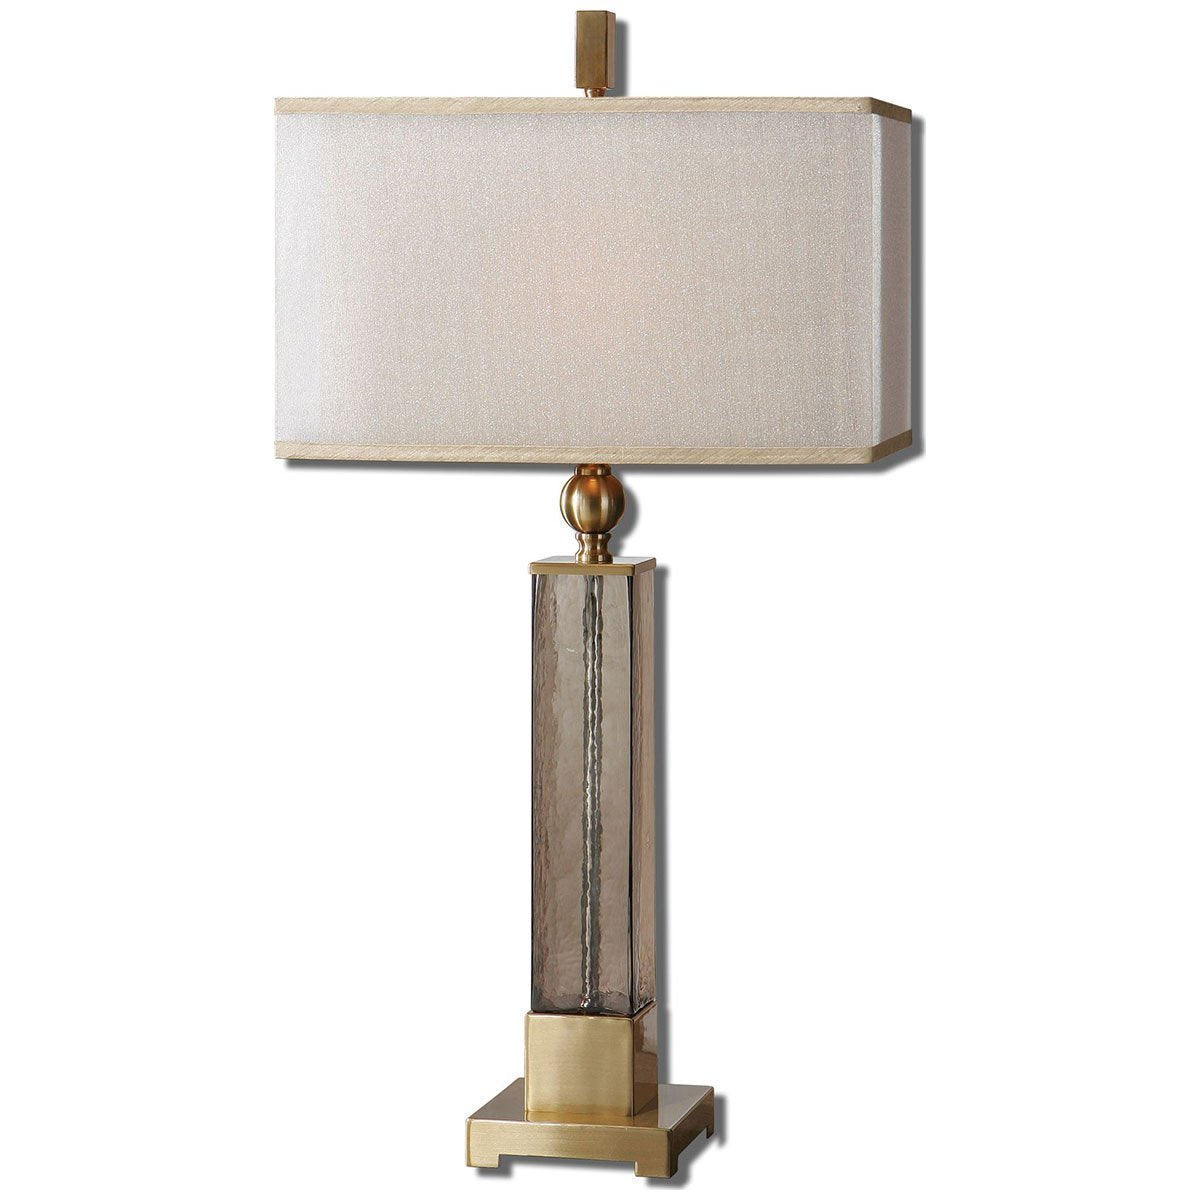 Uttermost Caecilia Amber Glass Table Lamp